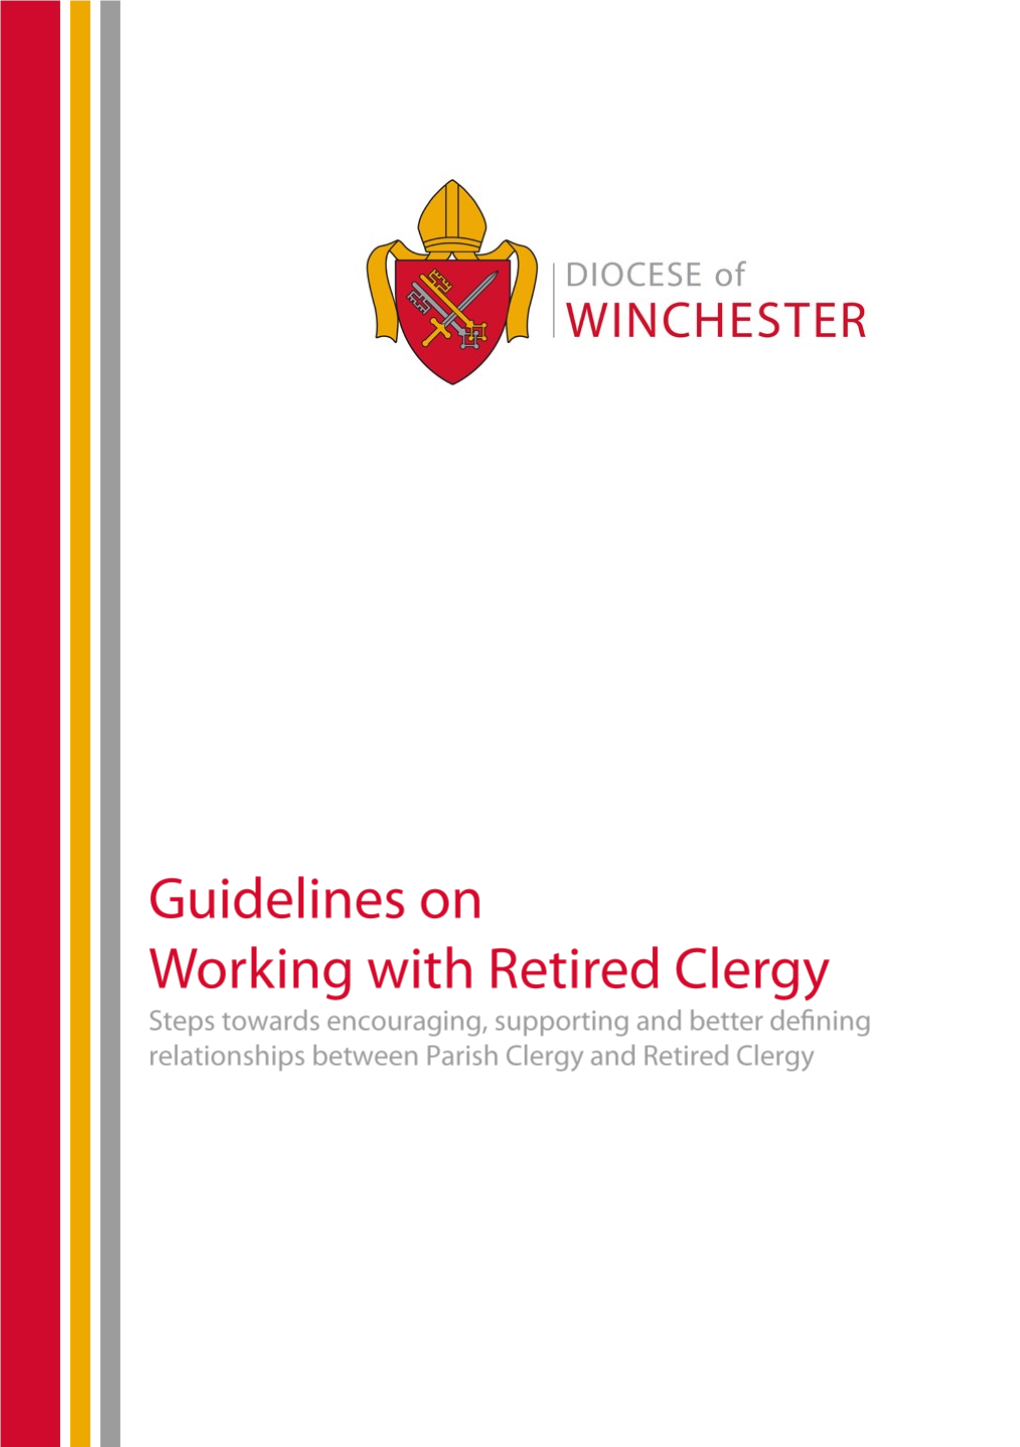 Guidelines on Working with Retired Clergy